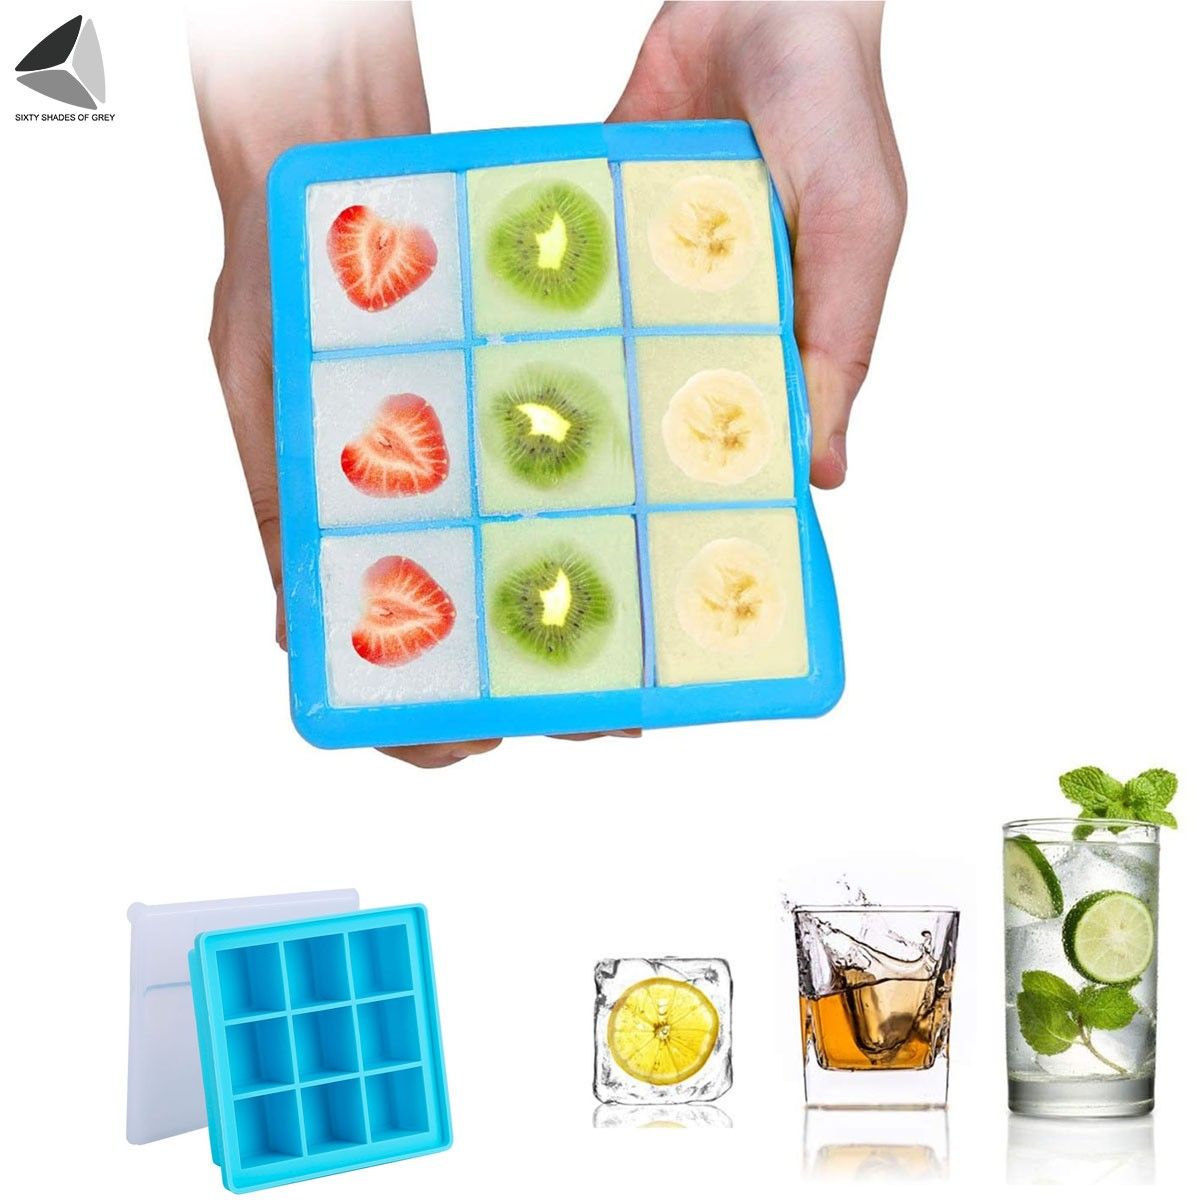 PULLIMORE 2 Pcs Ice Cube Trays 9 / 25 Pcs Square Flexible Easy Release Silicone Ice Maker Mold for Beverages Whiskey Wine Cocktail Coffee Juice (9 + 25 Gird) - image 1 of 9